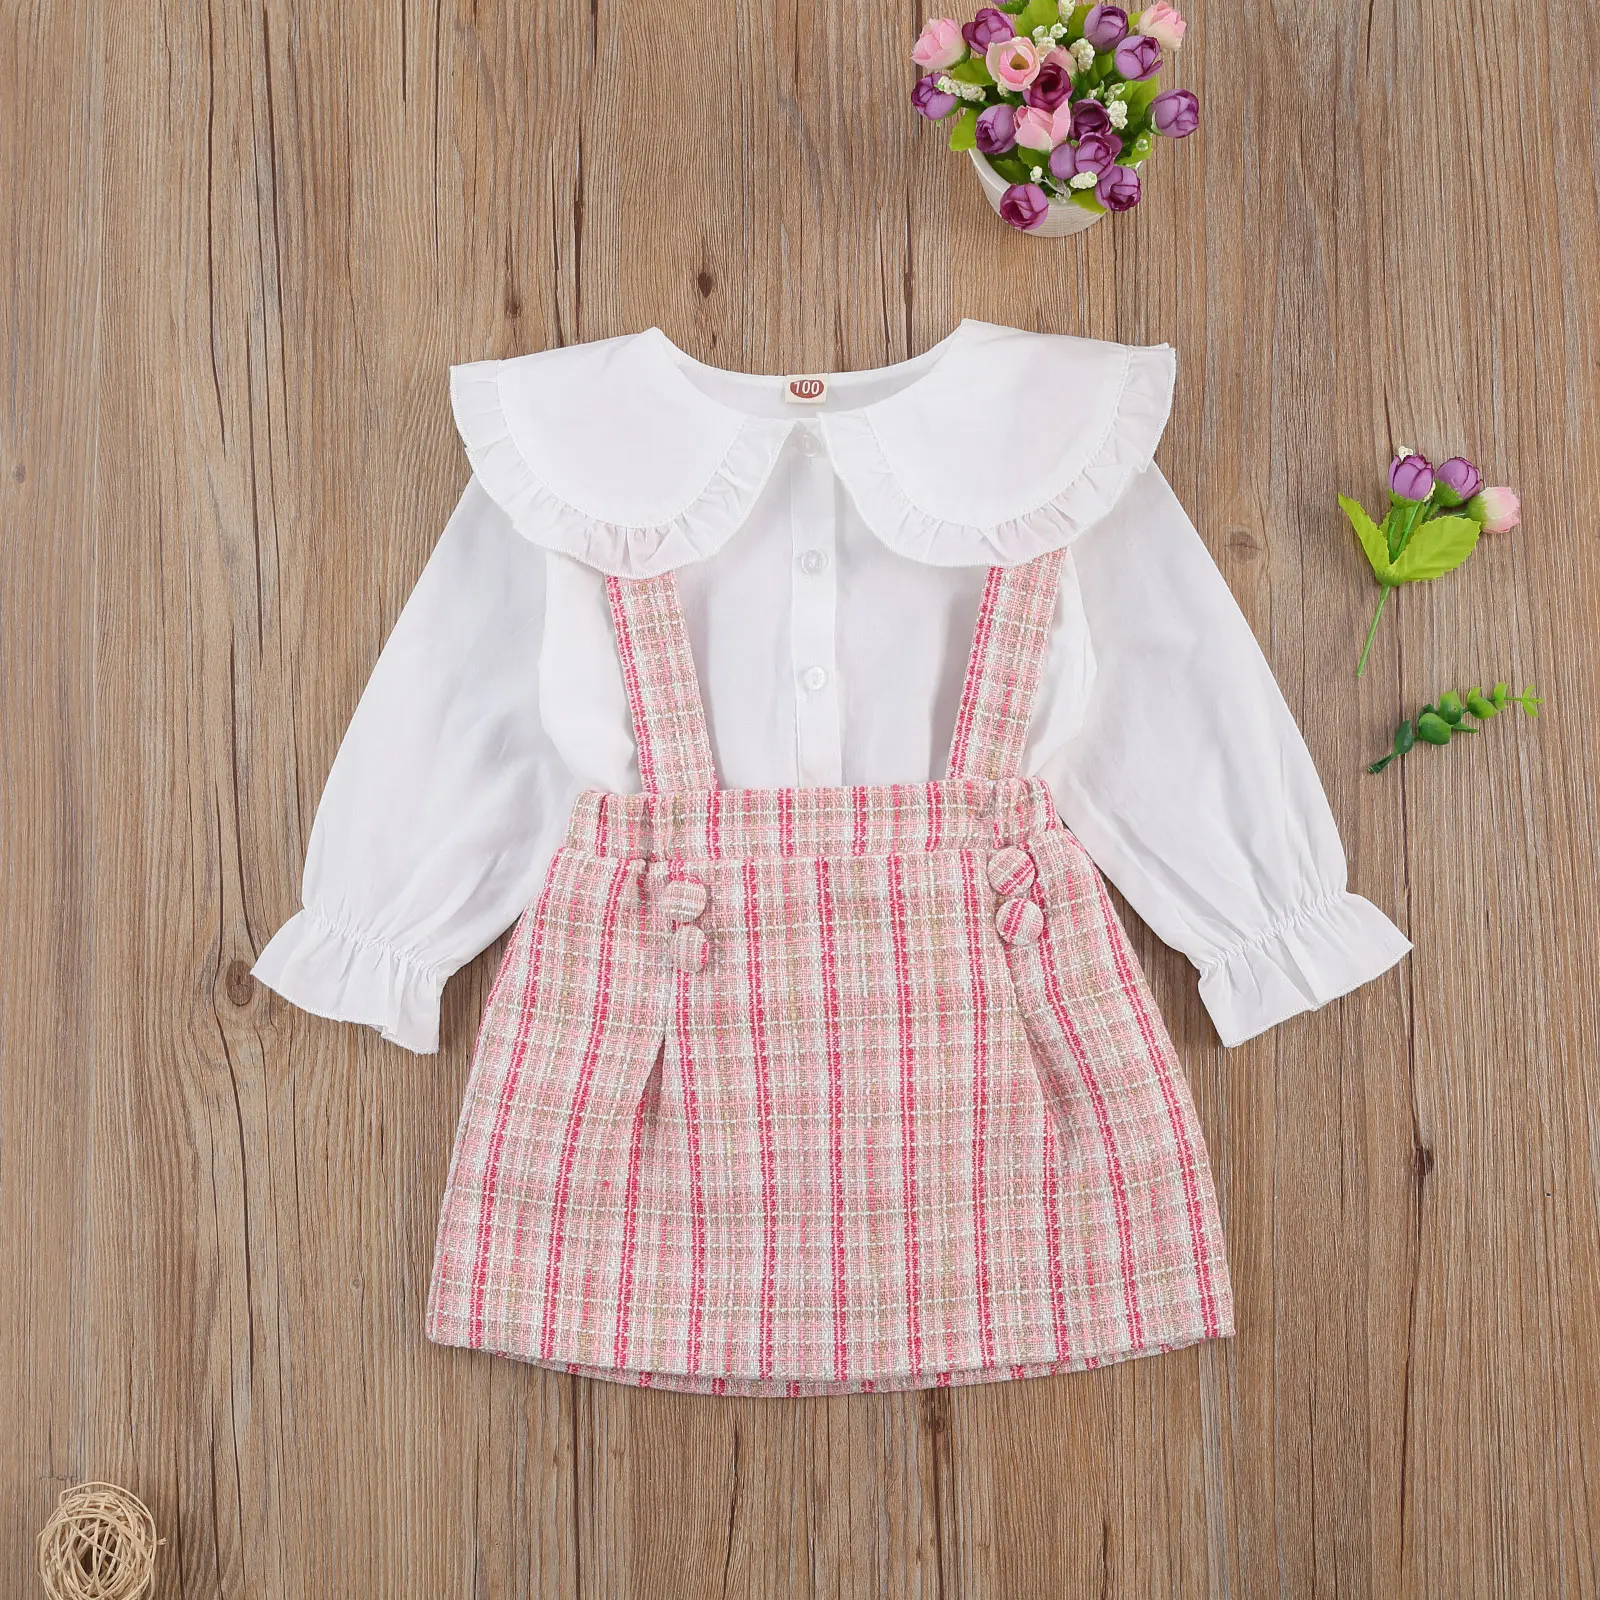 

Lovely Kids Baby Girls Clothes 2pcs Suit Peter Pan Collar Long Sleeve Shirt Plaid Suspender Skirt for Autumn Spring Outfits 2-7Y